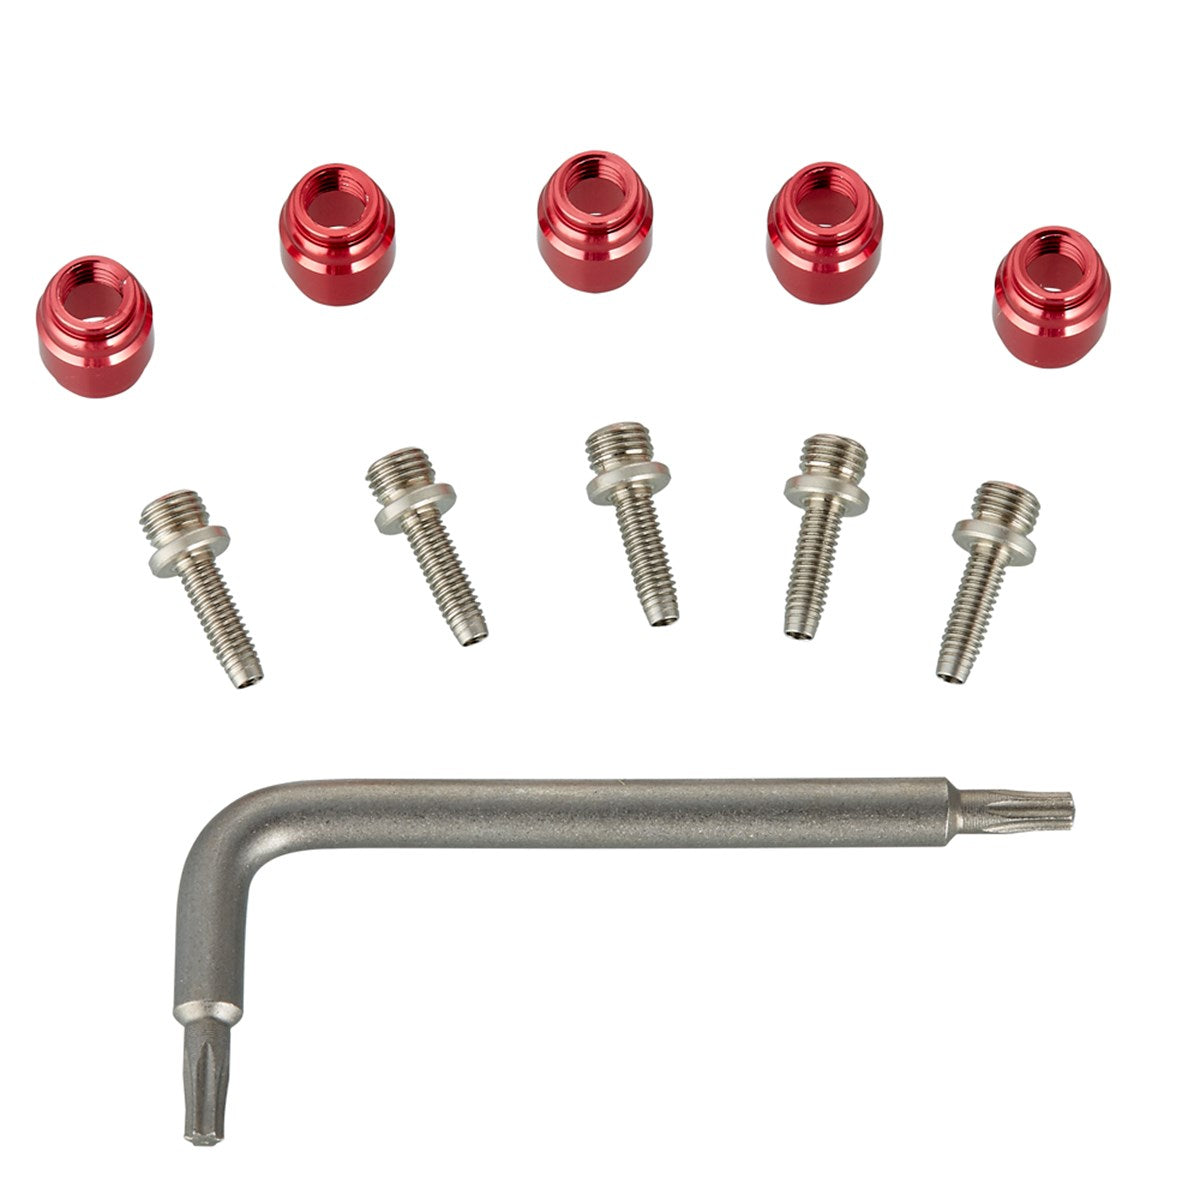 Sram Disc Brake Spare Lever Hydraulic Disc Brake Hose Fitting Kit (includes 5 Threaded Hosebarbs 5 Red Comp Fittings, 1 T8 Torx)